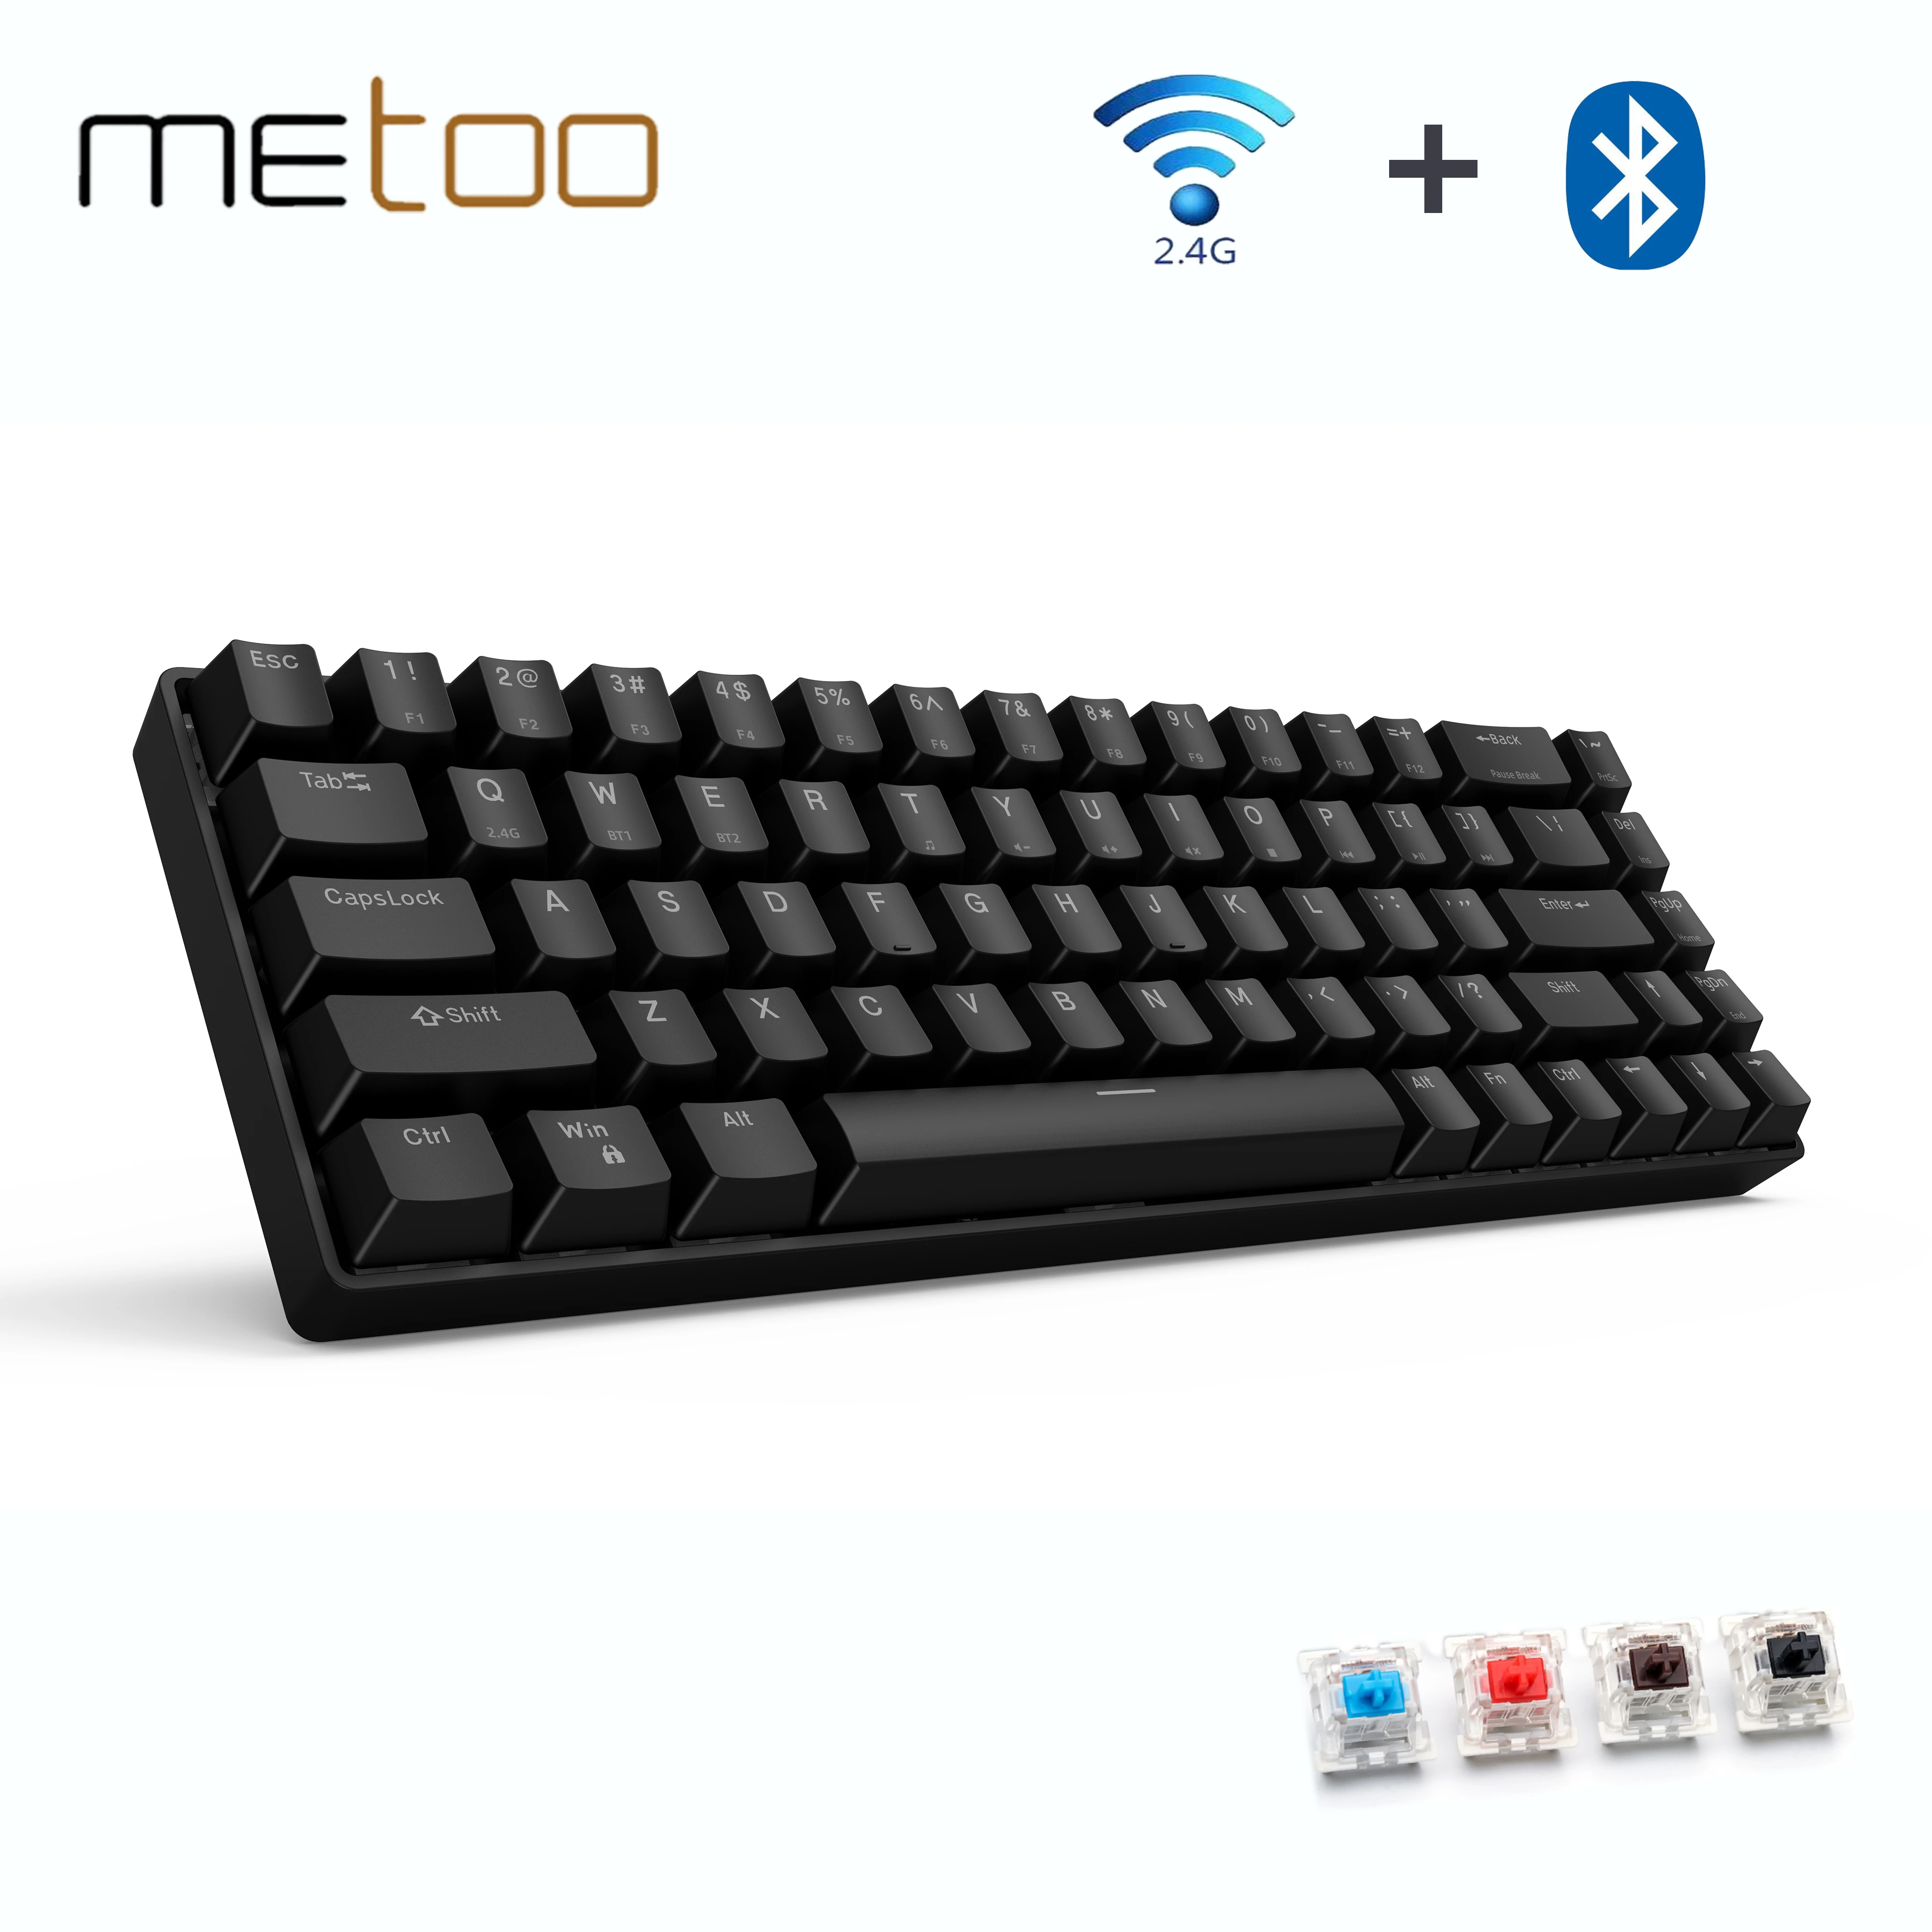 Metoo 68Key Game mechanical keyboard Wireless Bluetooth/2.4Ghz Blue red brown switch for Mac Windows Android